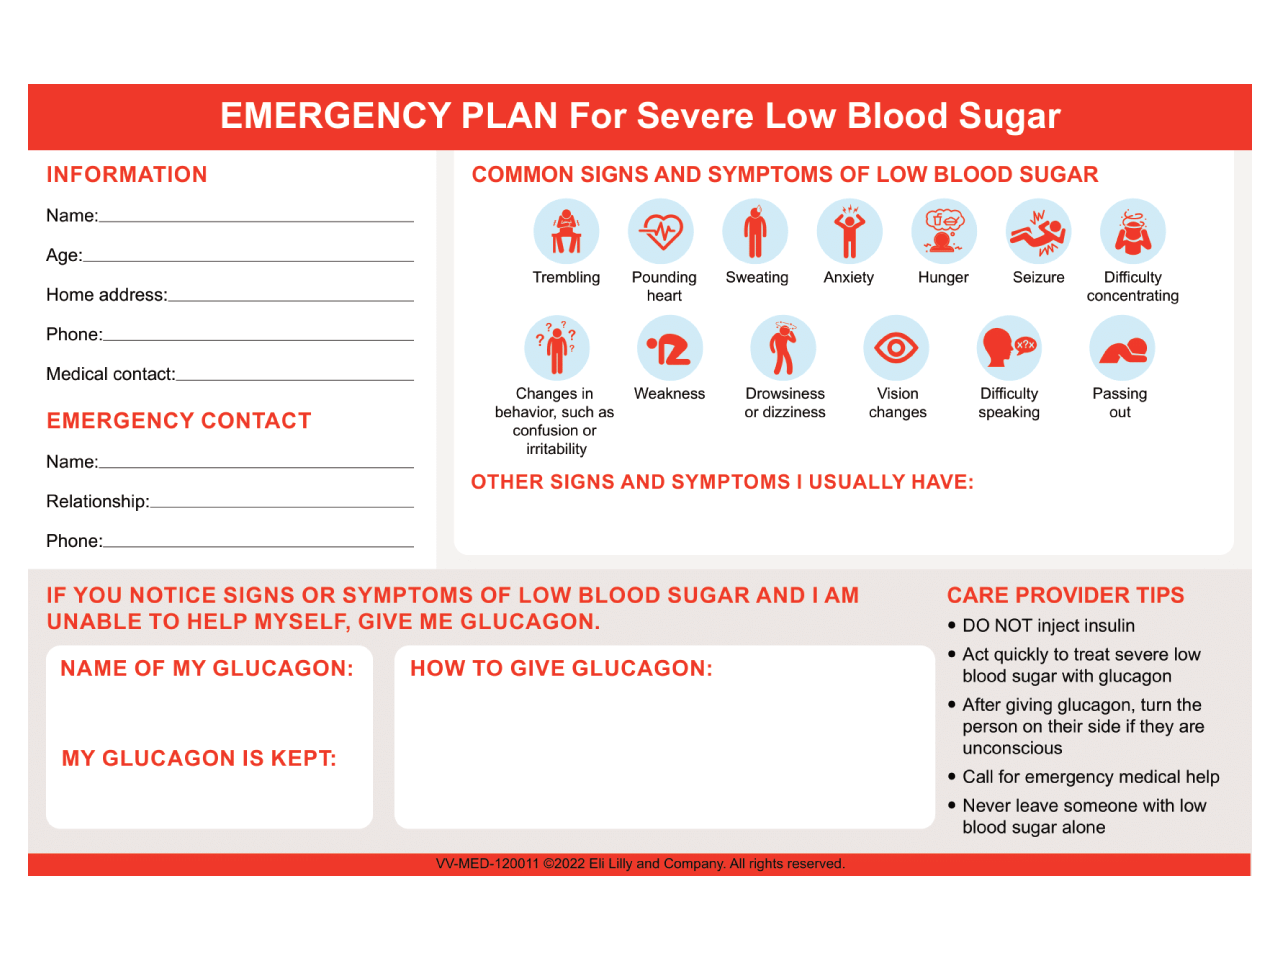 emergency plan tools for severe low blood sugar